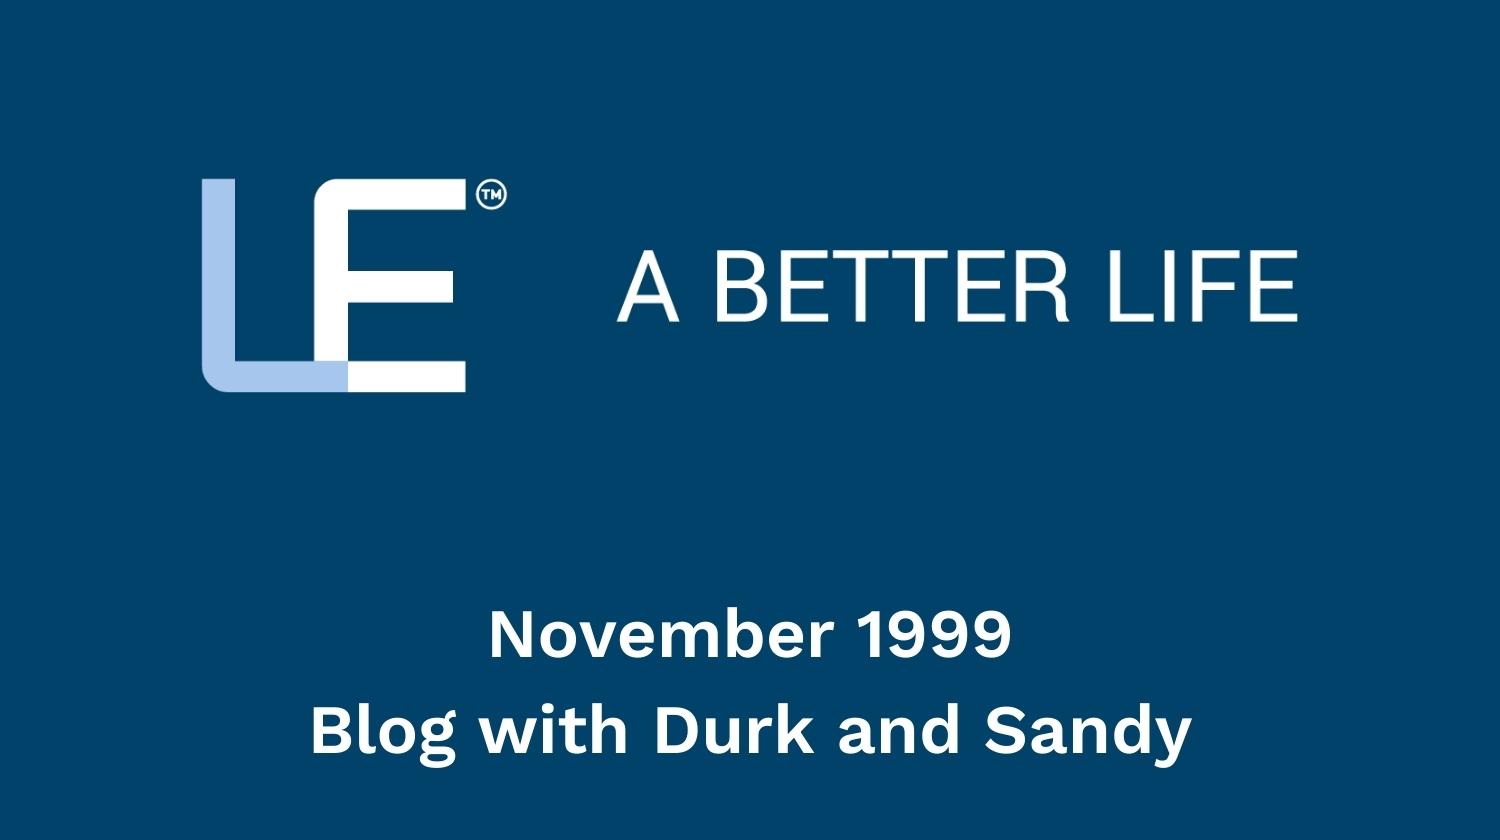 November 1999 Blog with Durk and Sandy